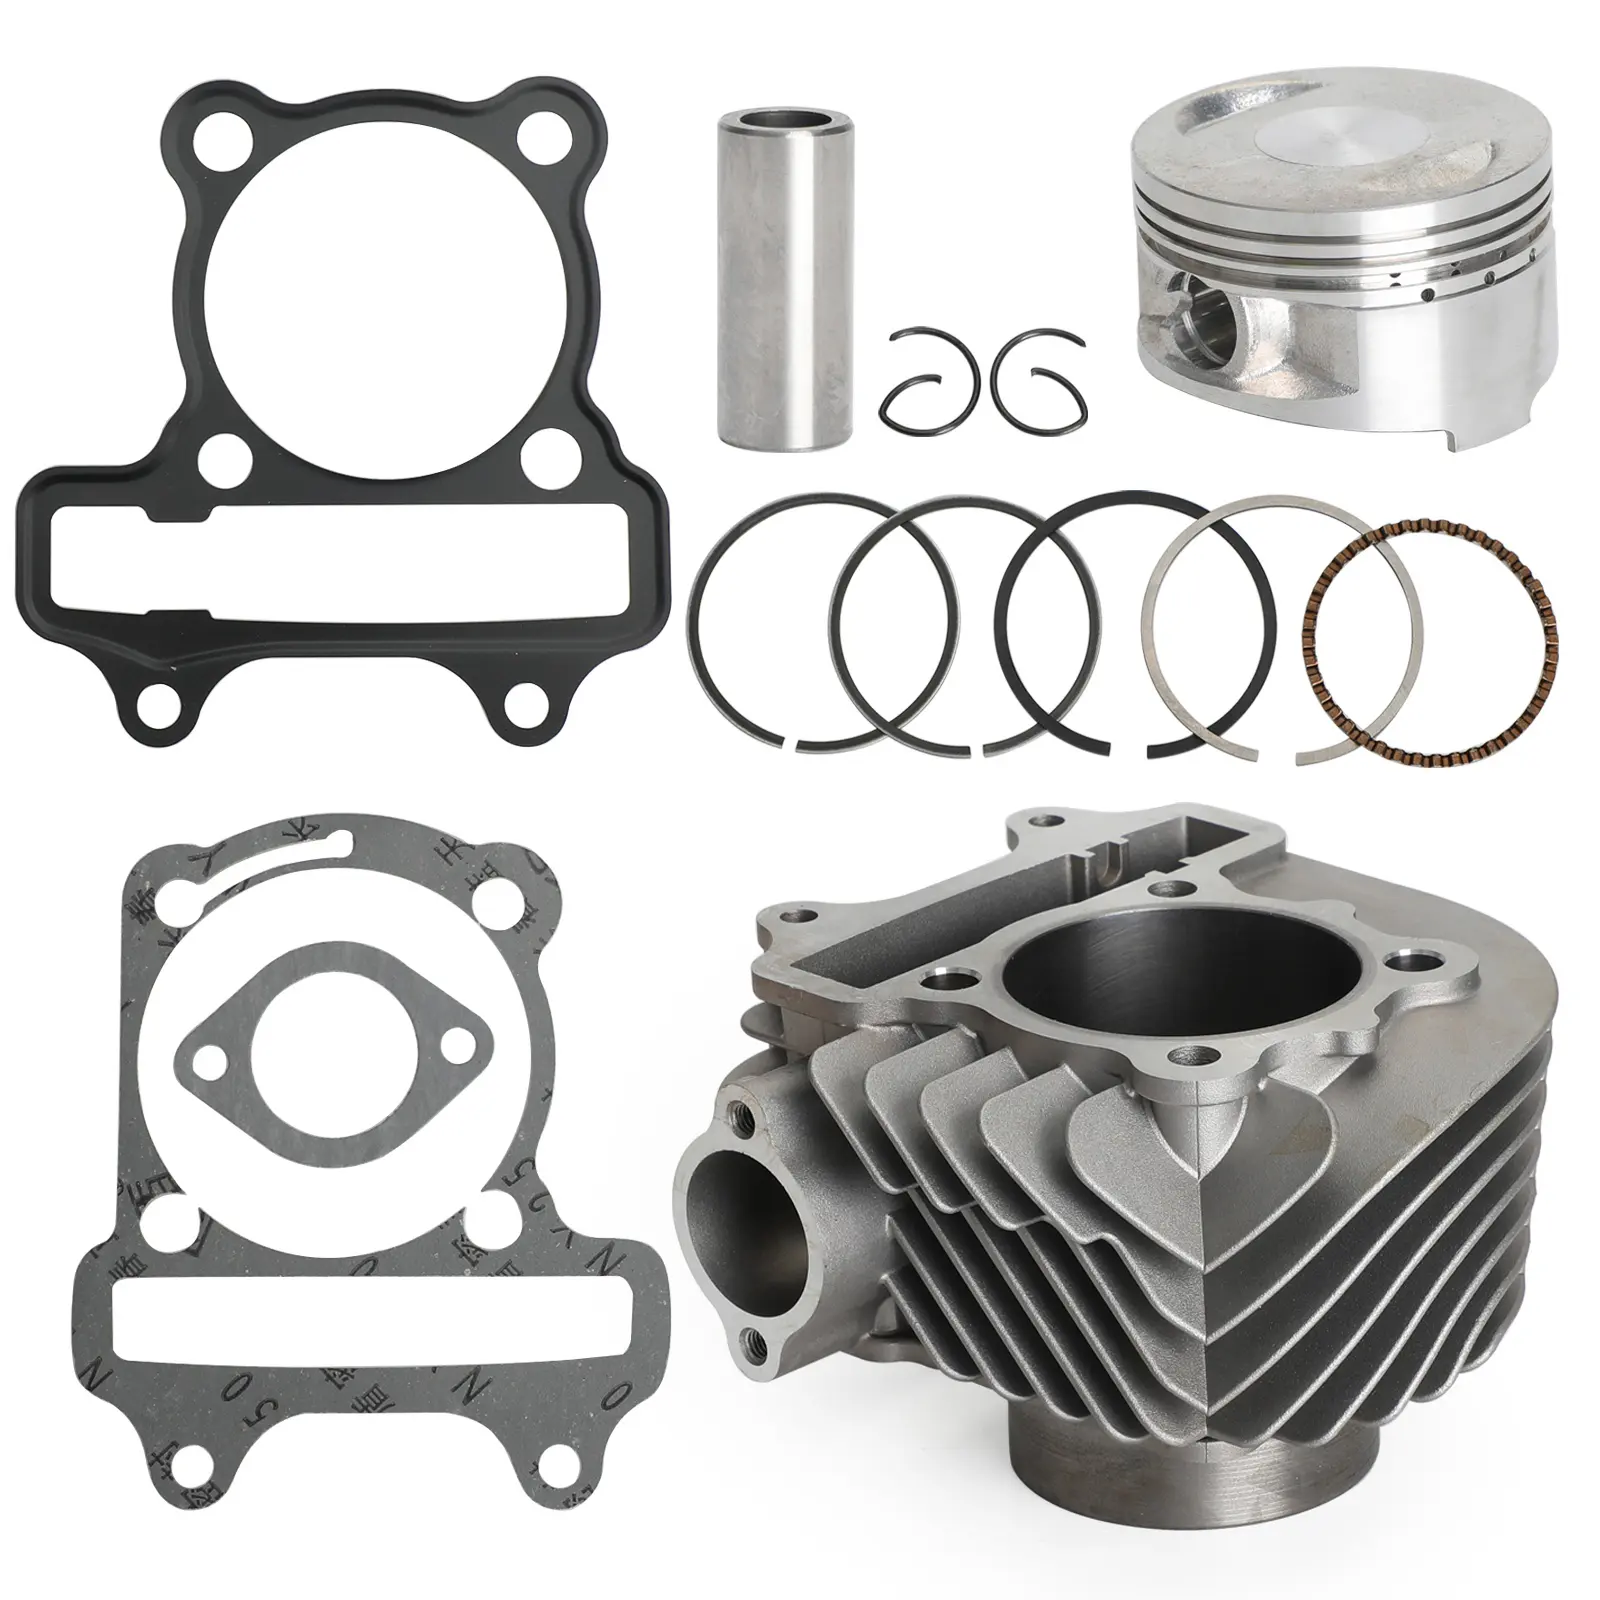 GY6 172cc 61mm Cylinder Jug Piston Top End Kit For Chinese 4-stroke Scooter Moped with 152QMI 157QMJ Engines